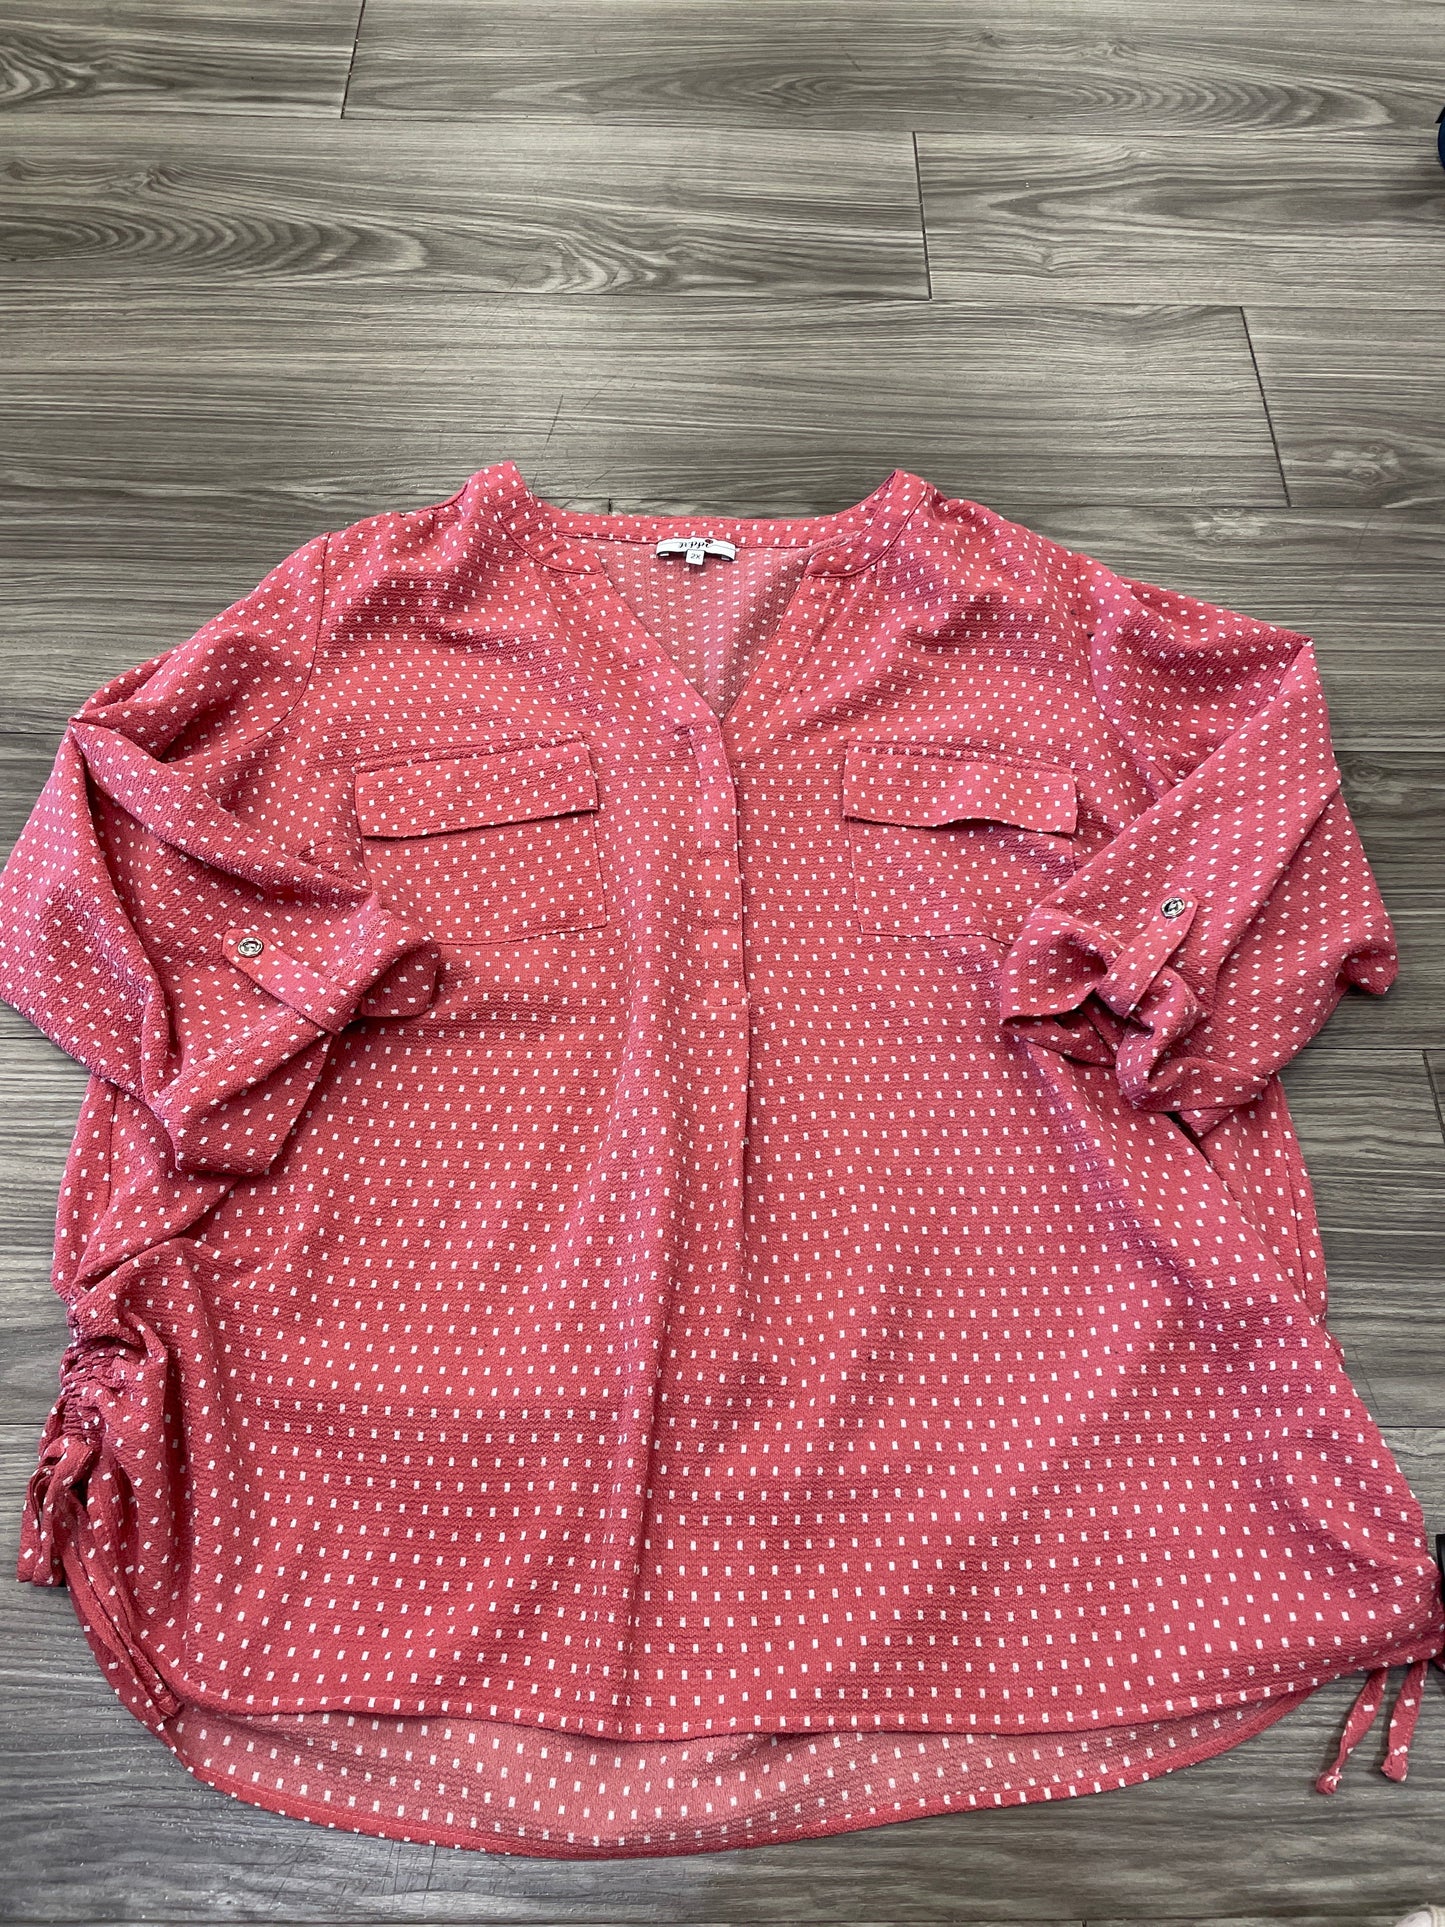 Pink Top Long Sleeve Clothes Mentor, Size 2x